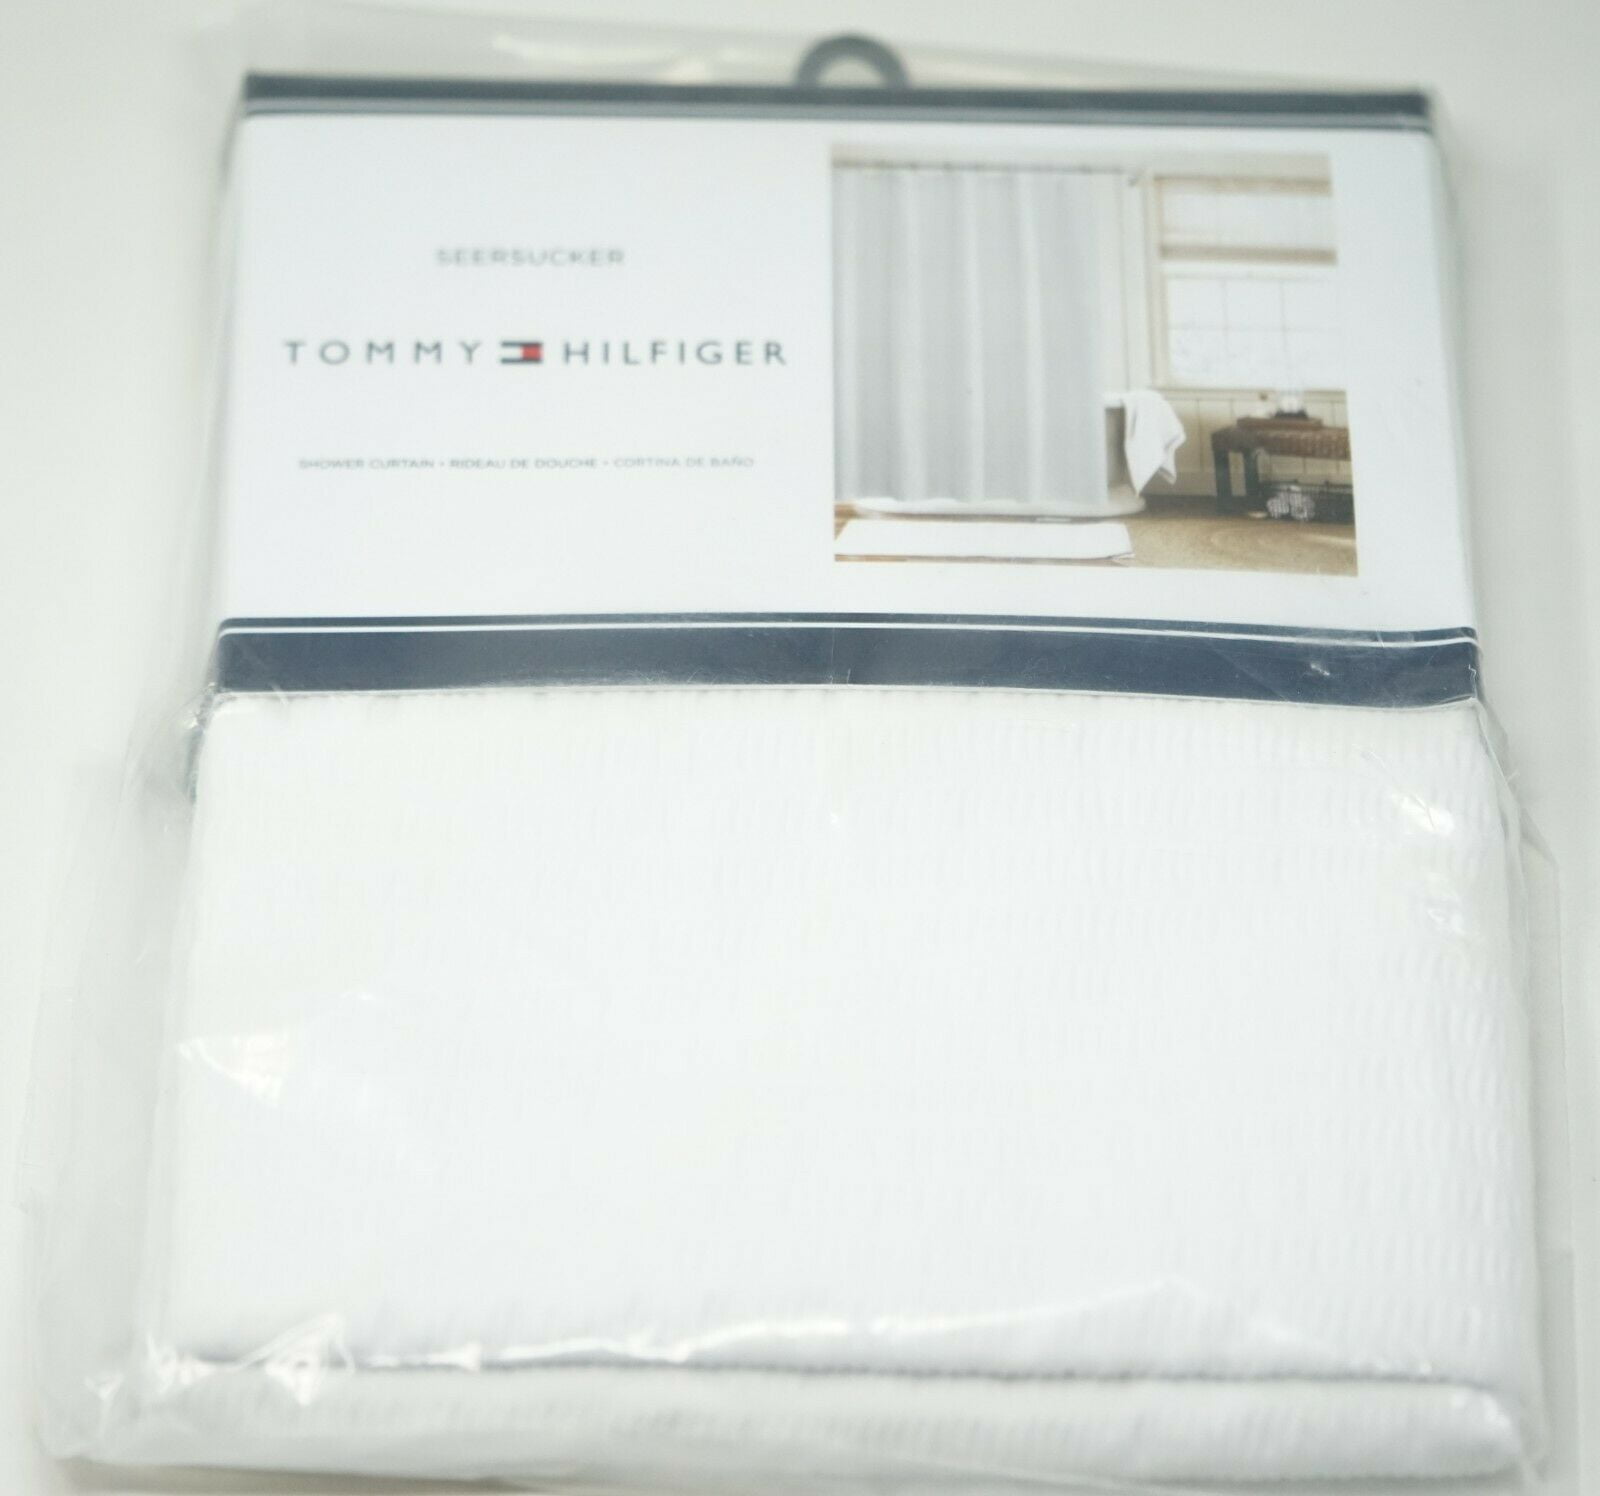 Tommy Hilfiger Home Shower Curtain 72 x 72 100% Cotton New $65.00 